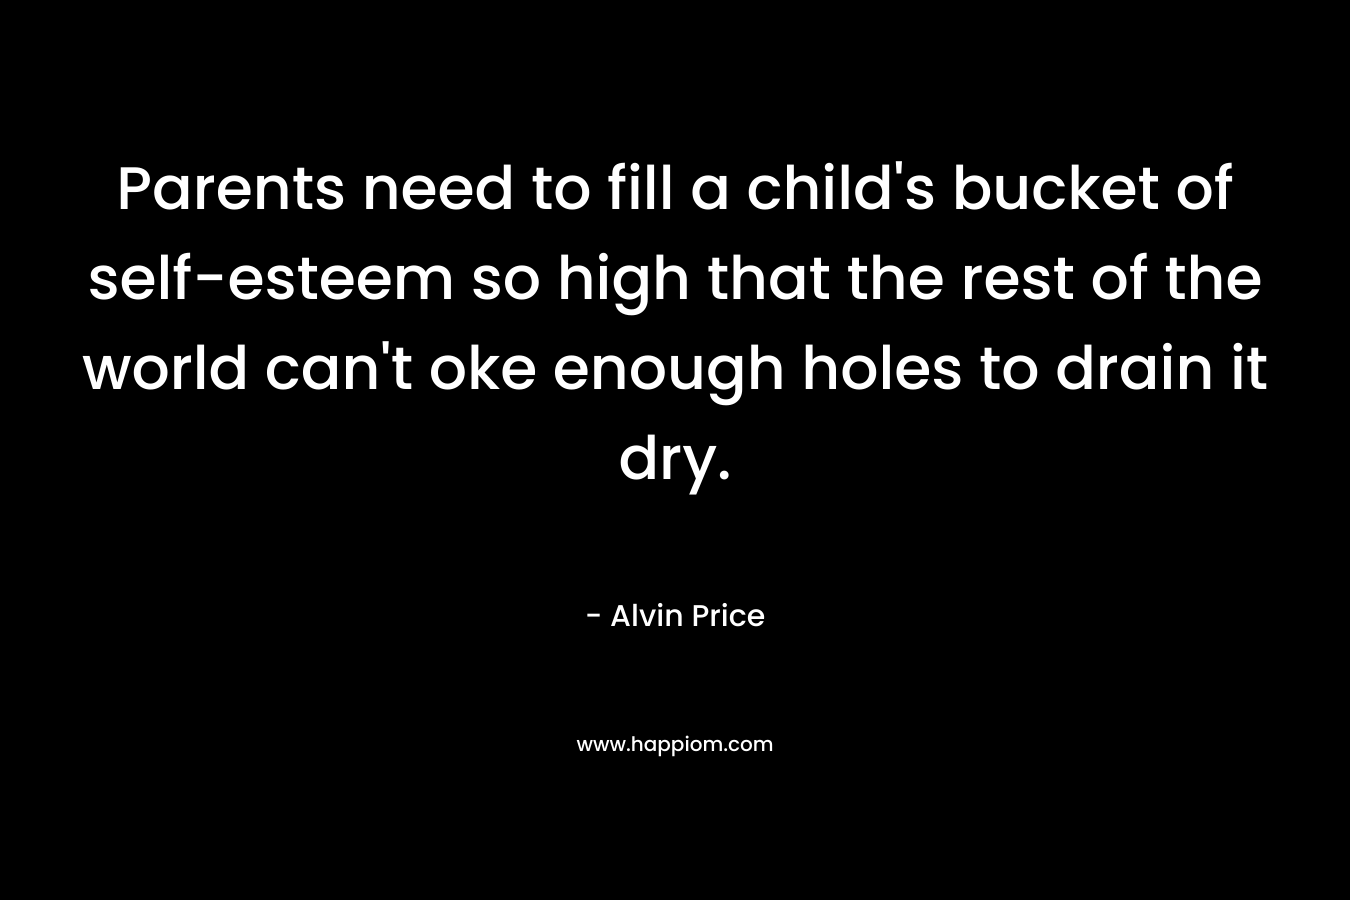 Parents need to fill a child's bucket of self-esteem so high that the rest of the world can't oke enough holes to drain it dry.